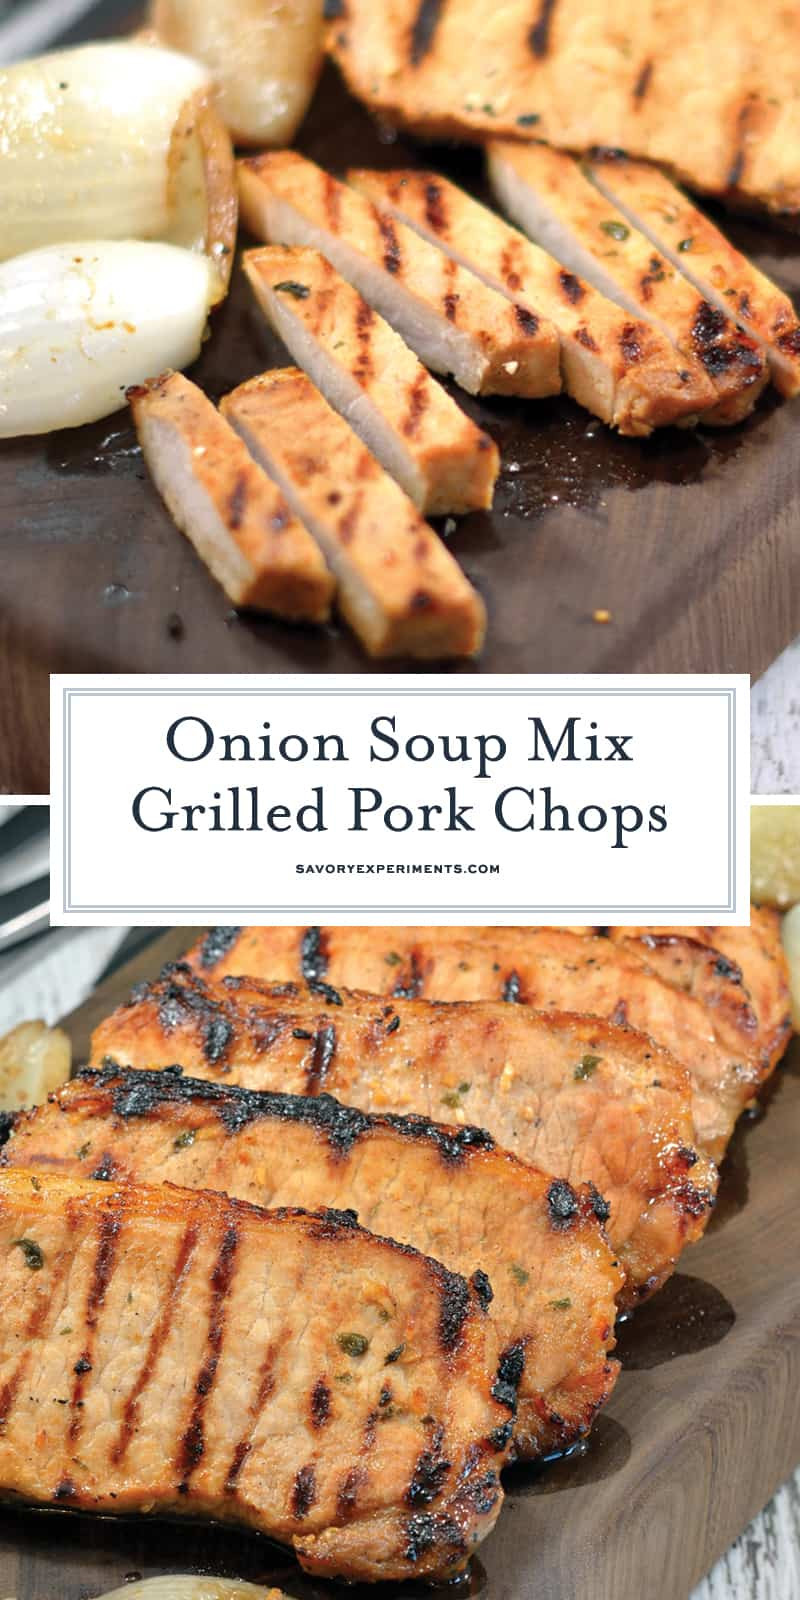 Pork Chops And Rice Recipe With Onion Soup Mix
 ion Soup Mix Grilled Pork Chops An Easy Pork Chop Recipe